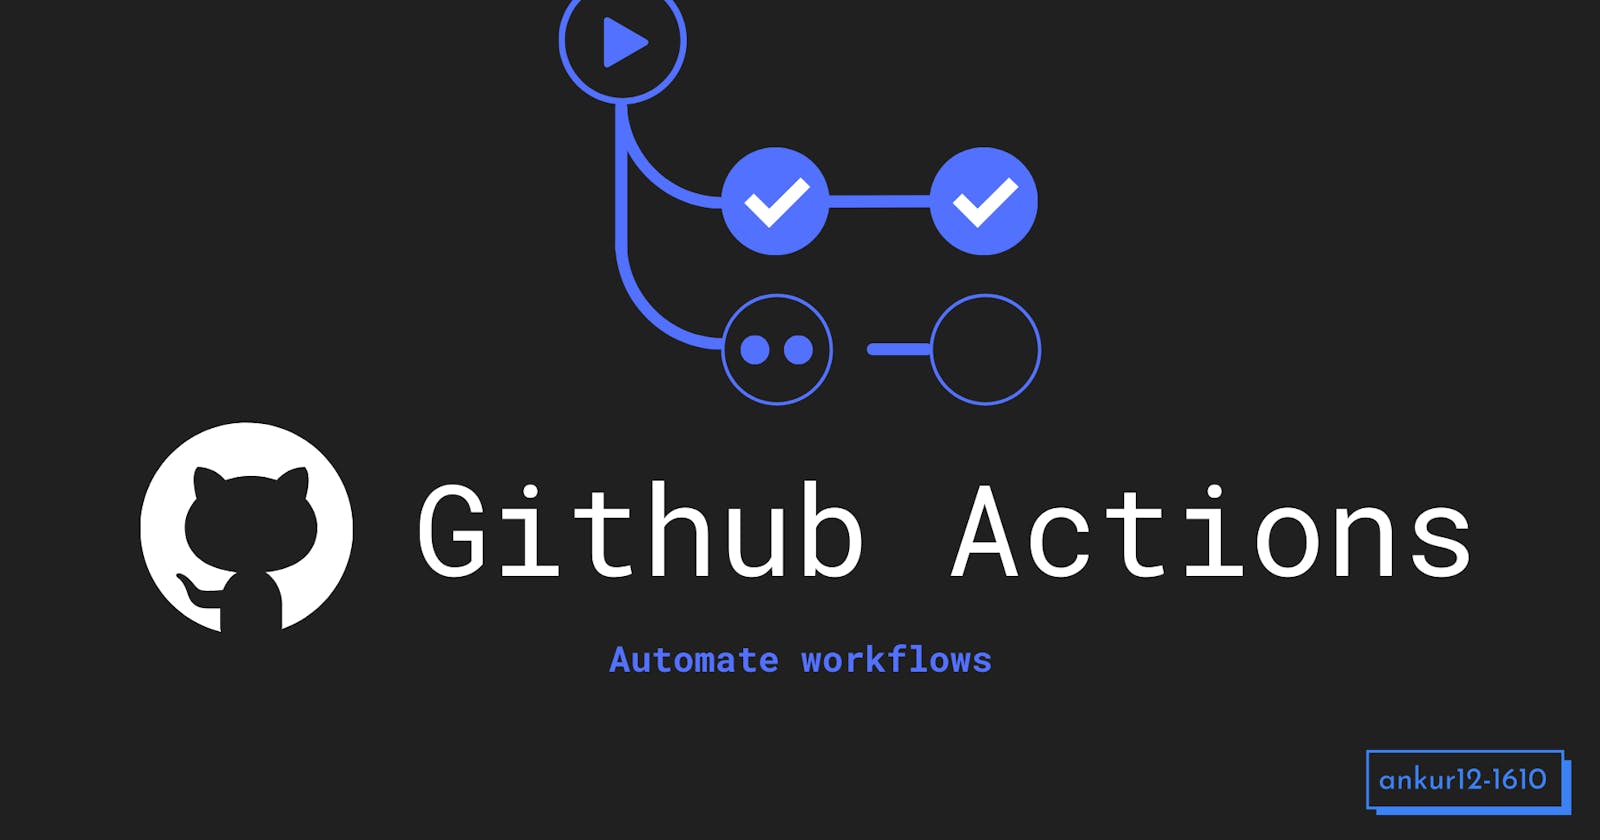 Build your own Github Action and publish to the Github Marketplace!